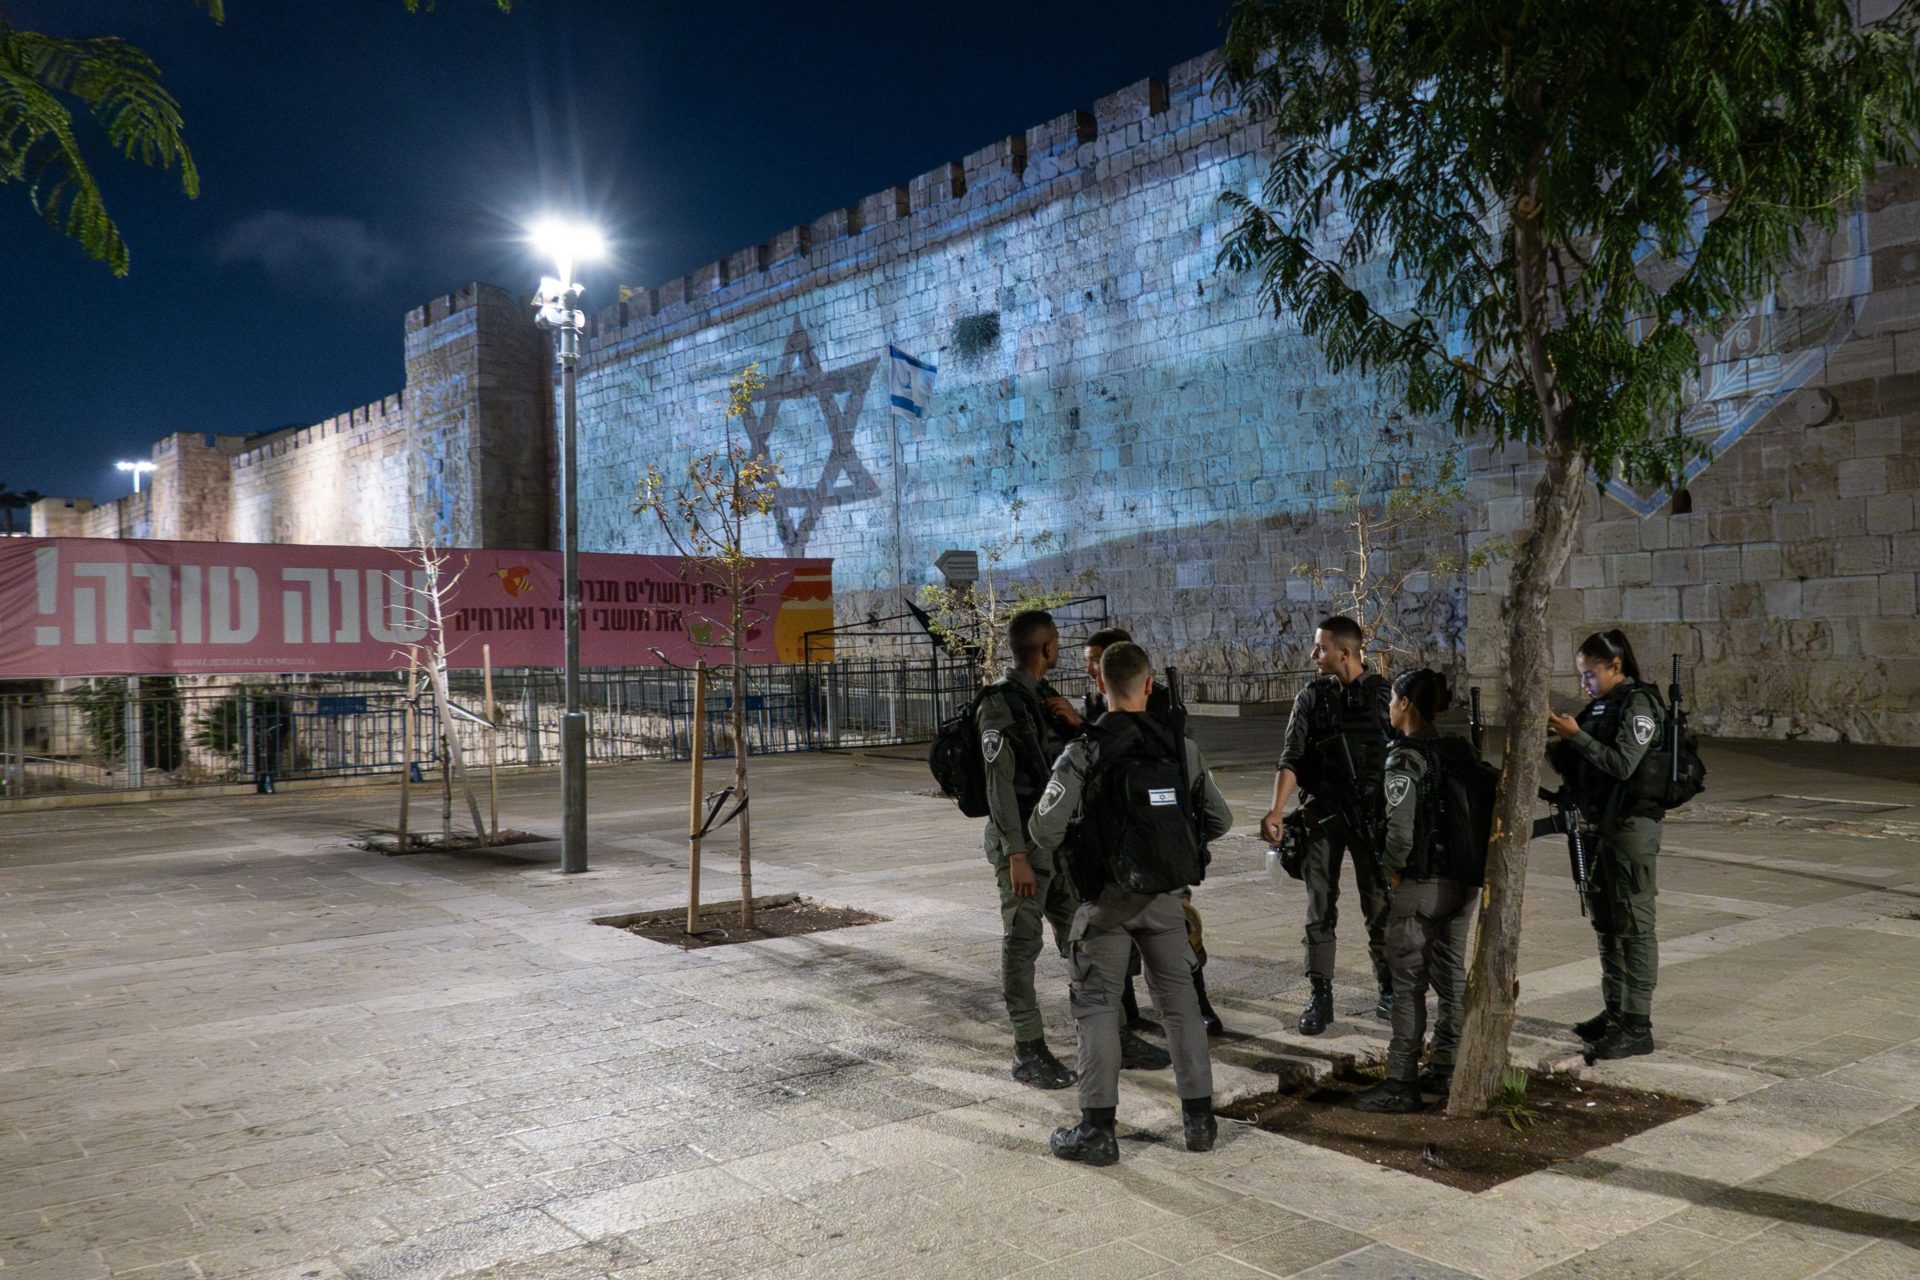 The Israeli flag is projected on the walls of Jerusalem's Old City near the Jaffa Gate following the Hamas attack